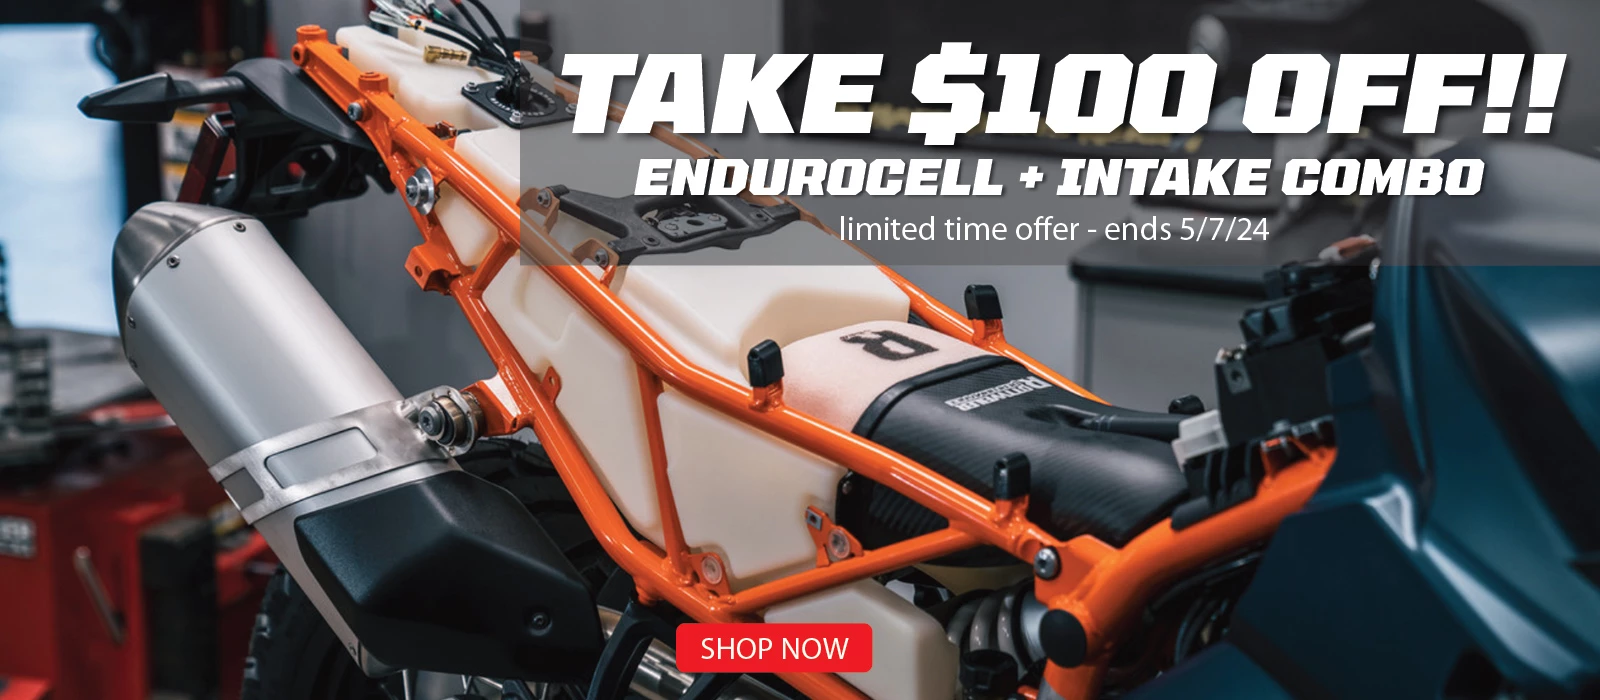 $100 Off EnduroCell Combo